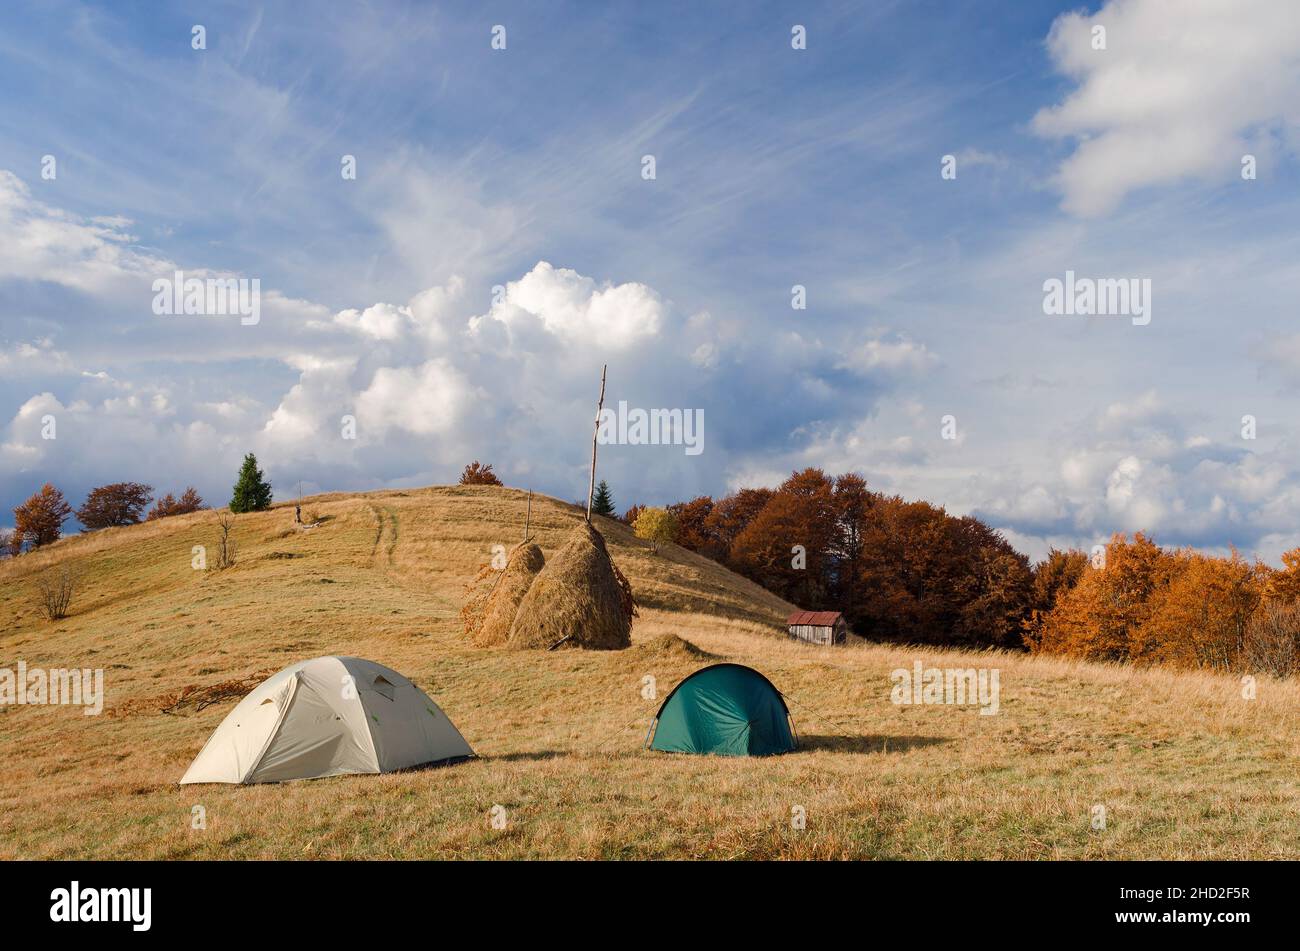 Camping with two tourist tents in the mountains. Autumn landscape Stock Photo